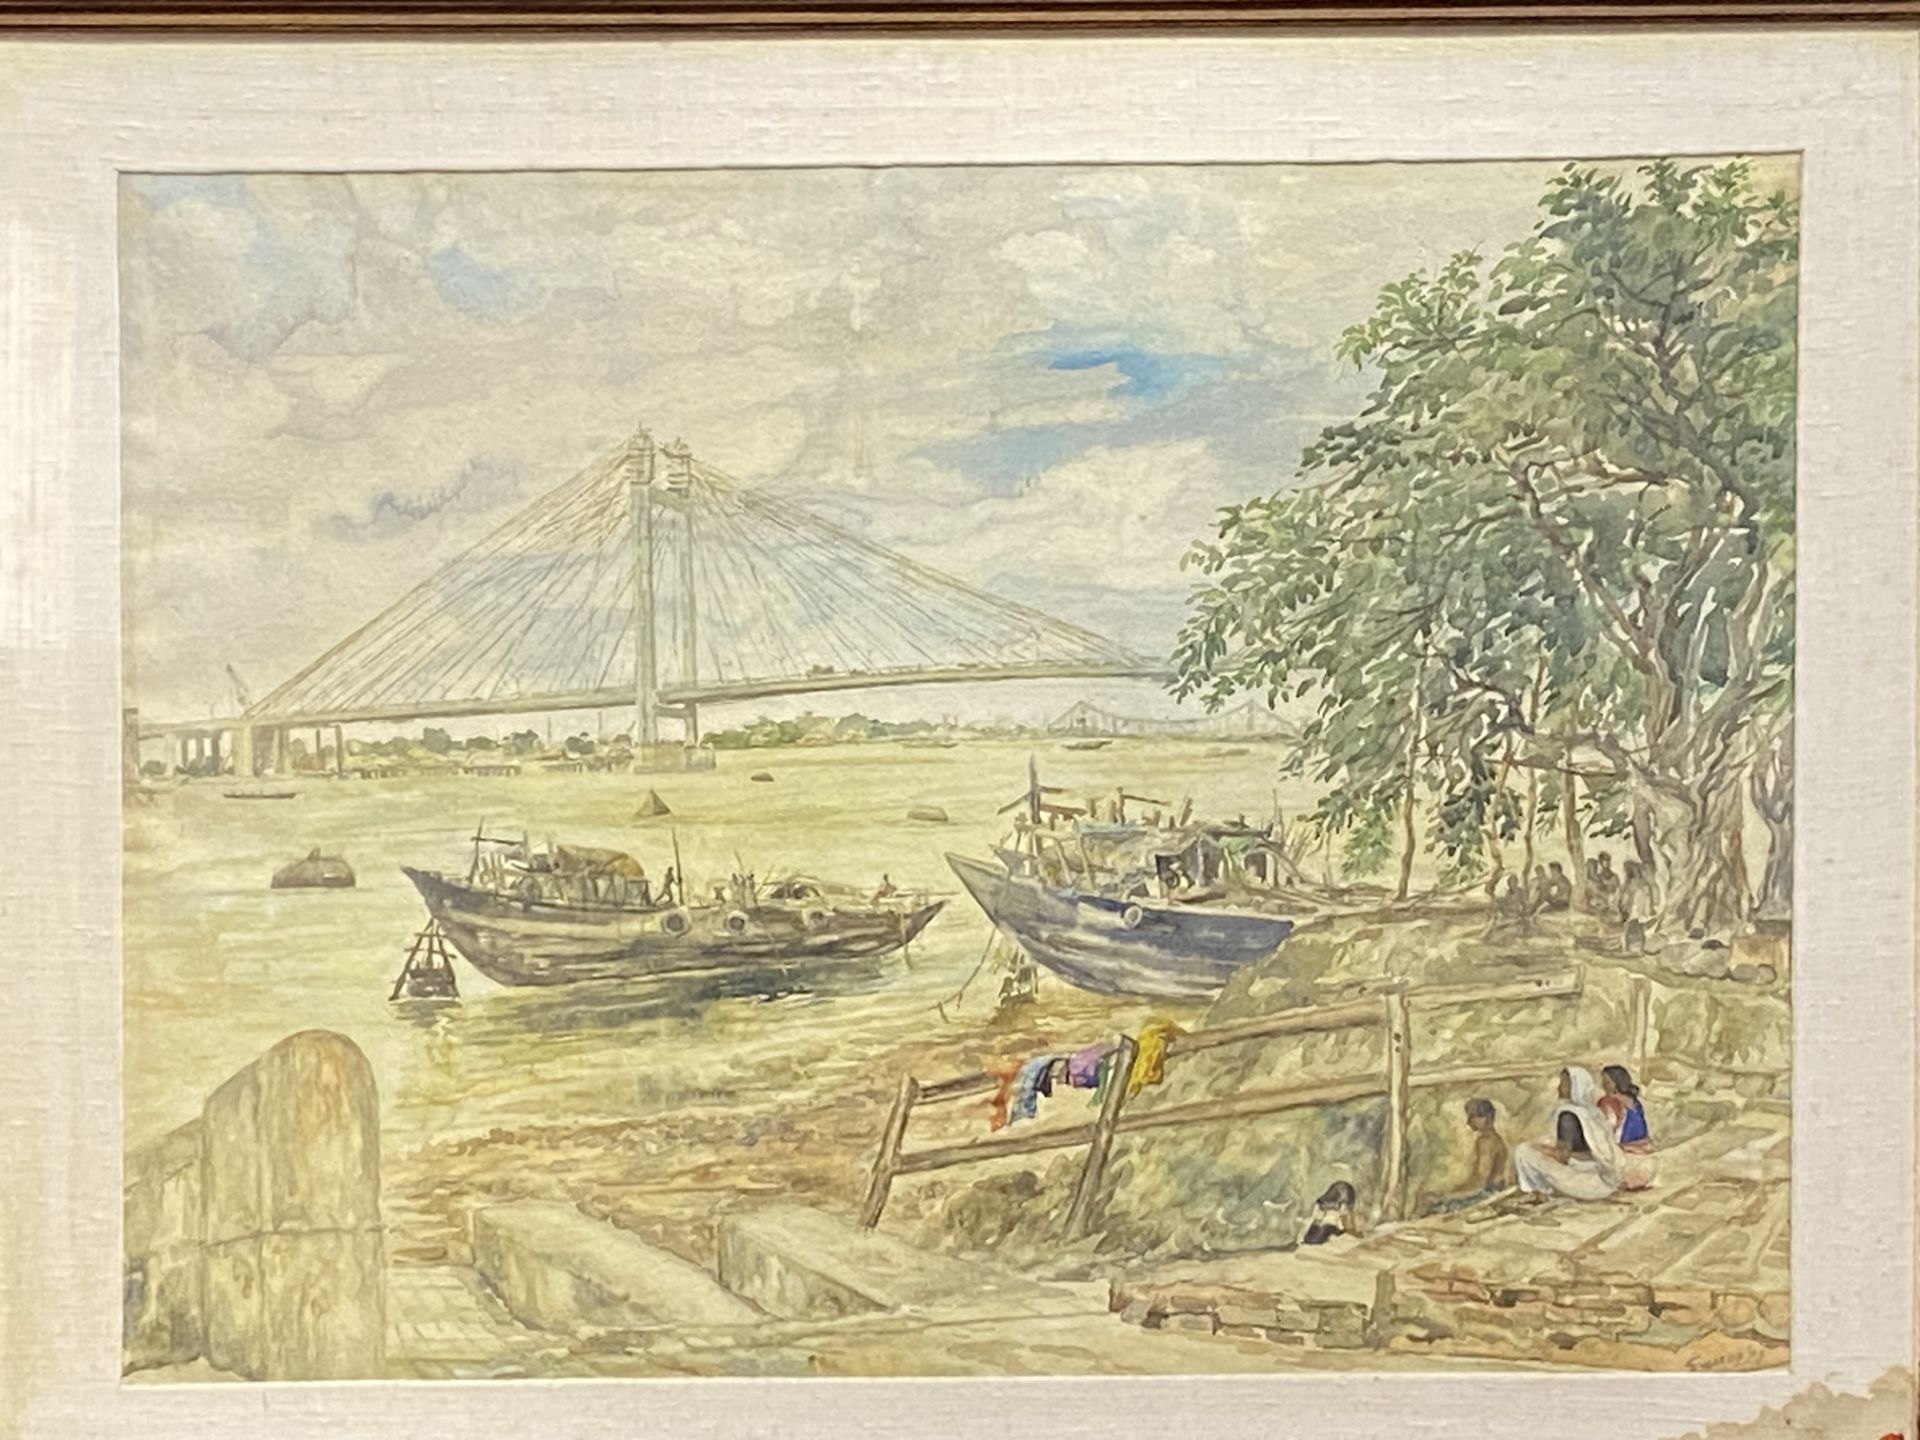 Framed and glazed 19th century watercolour of a river scene in India, signed by artist - Image 5 of 5